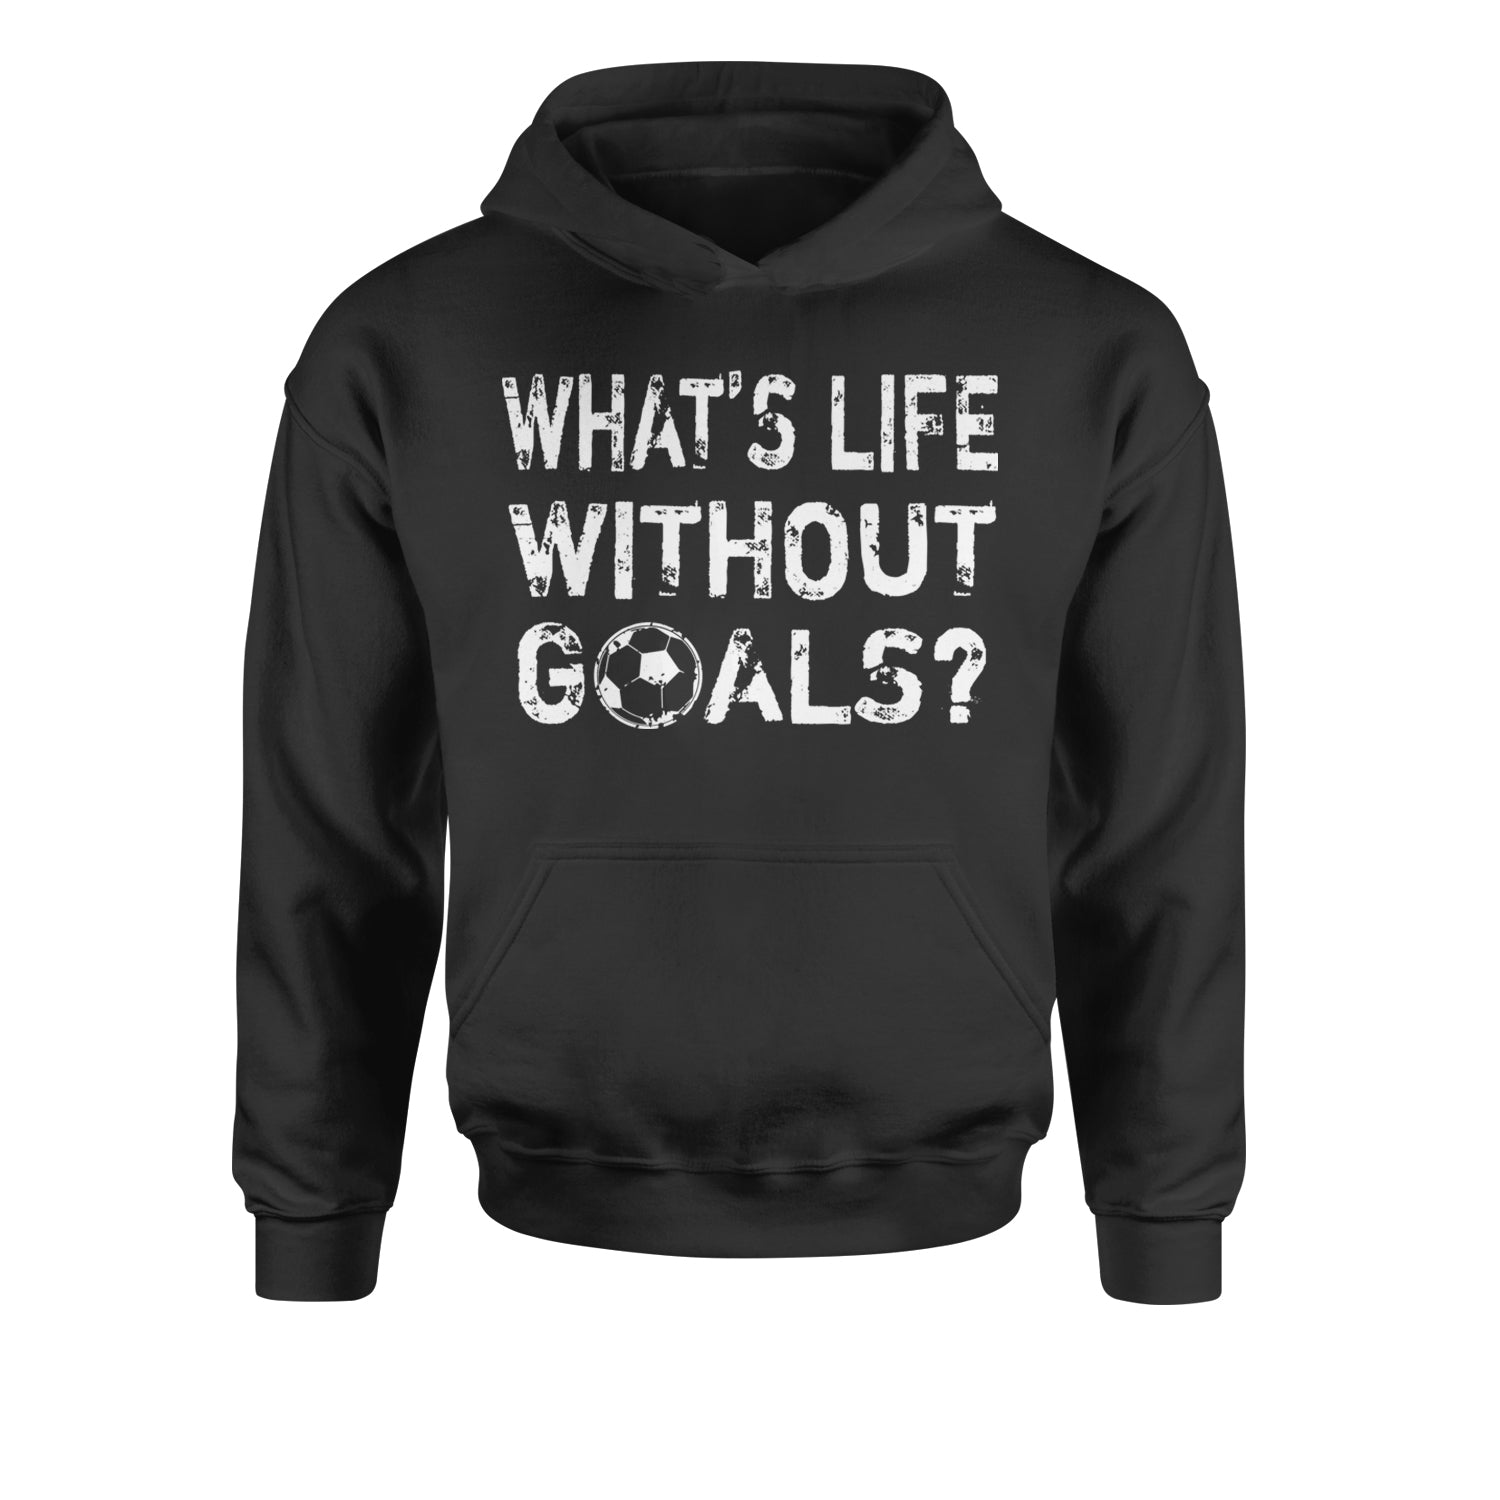 What's Life Without Goals Soccer Futbol Youth-Sized Hoodie